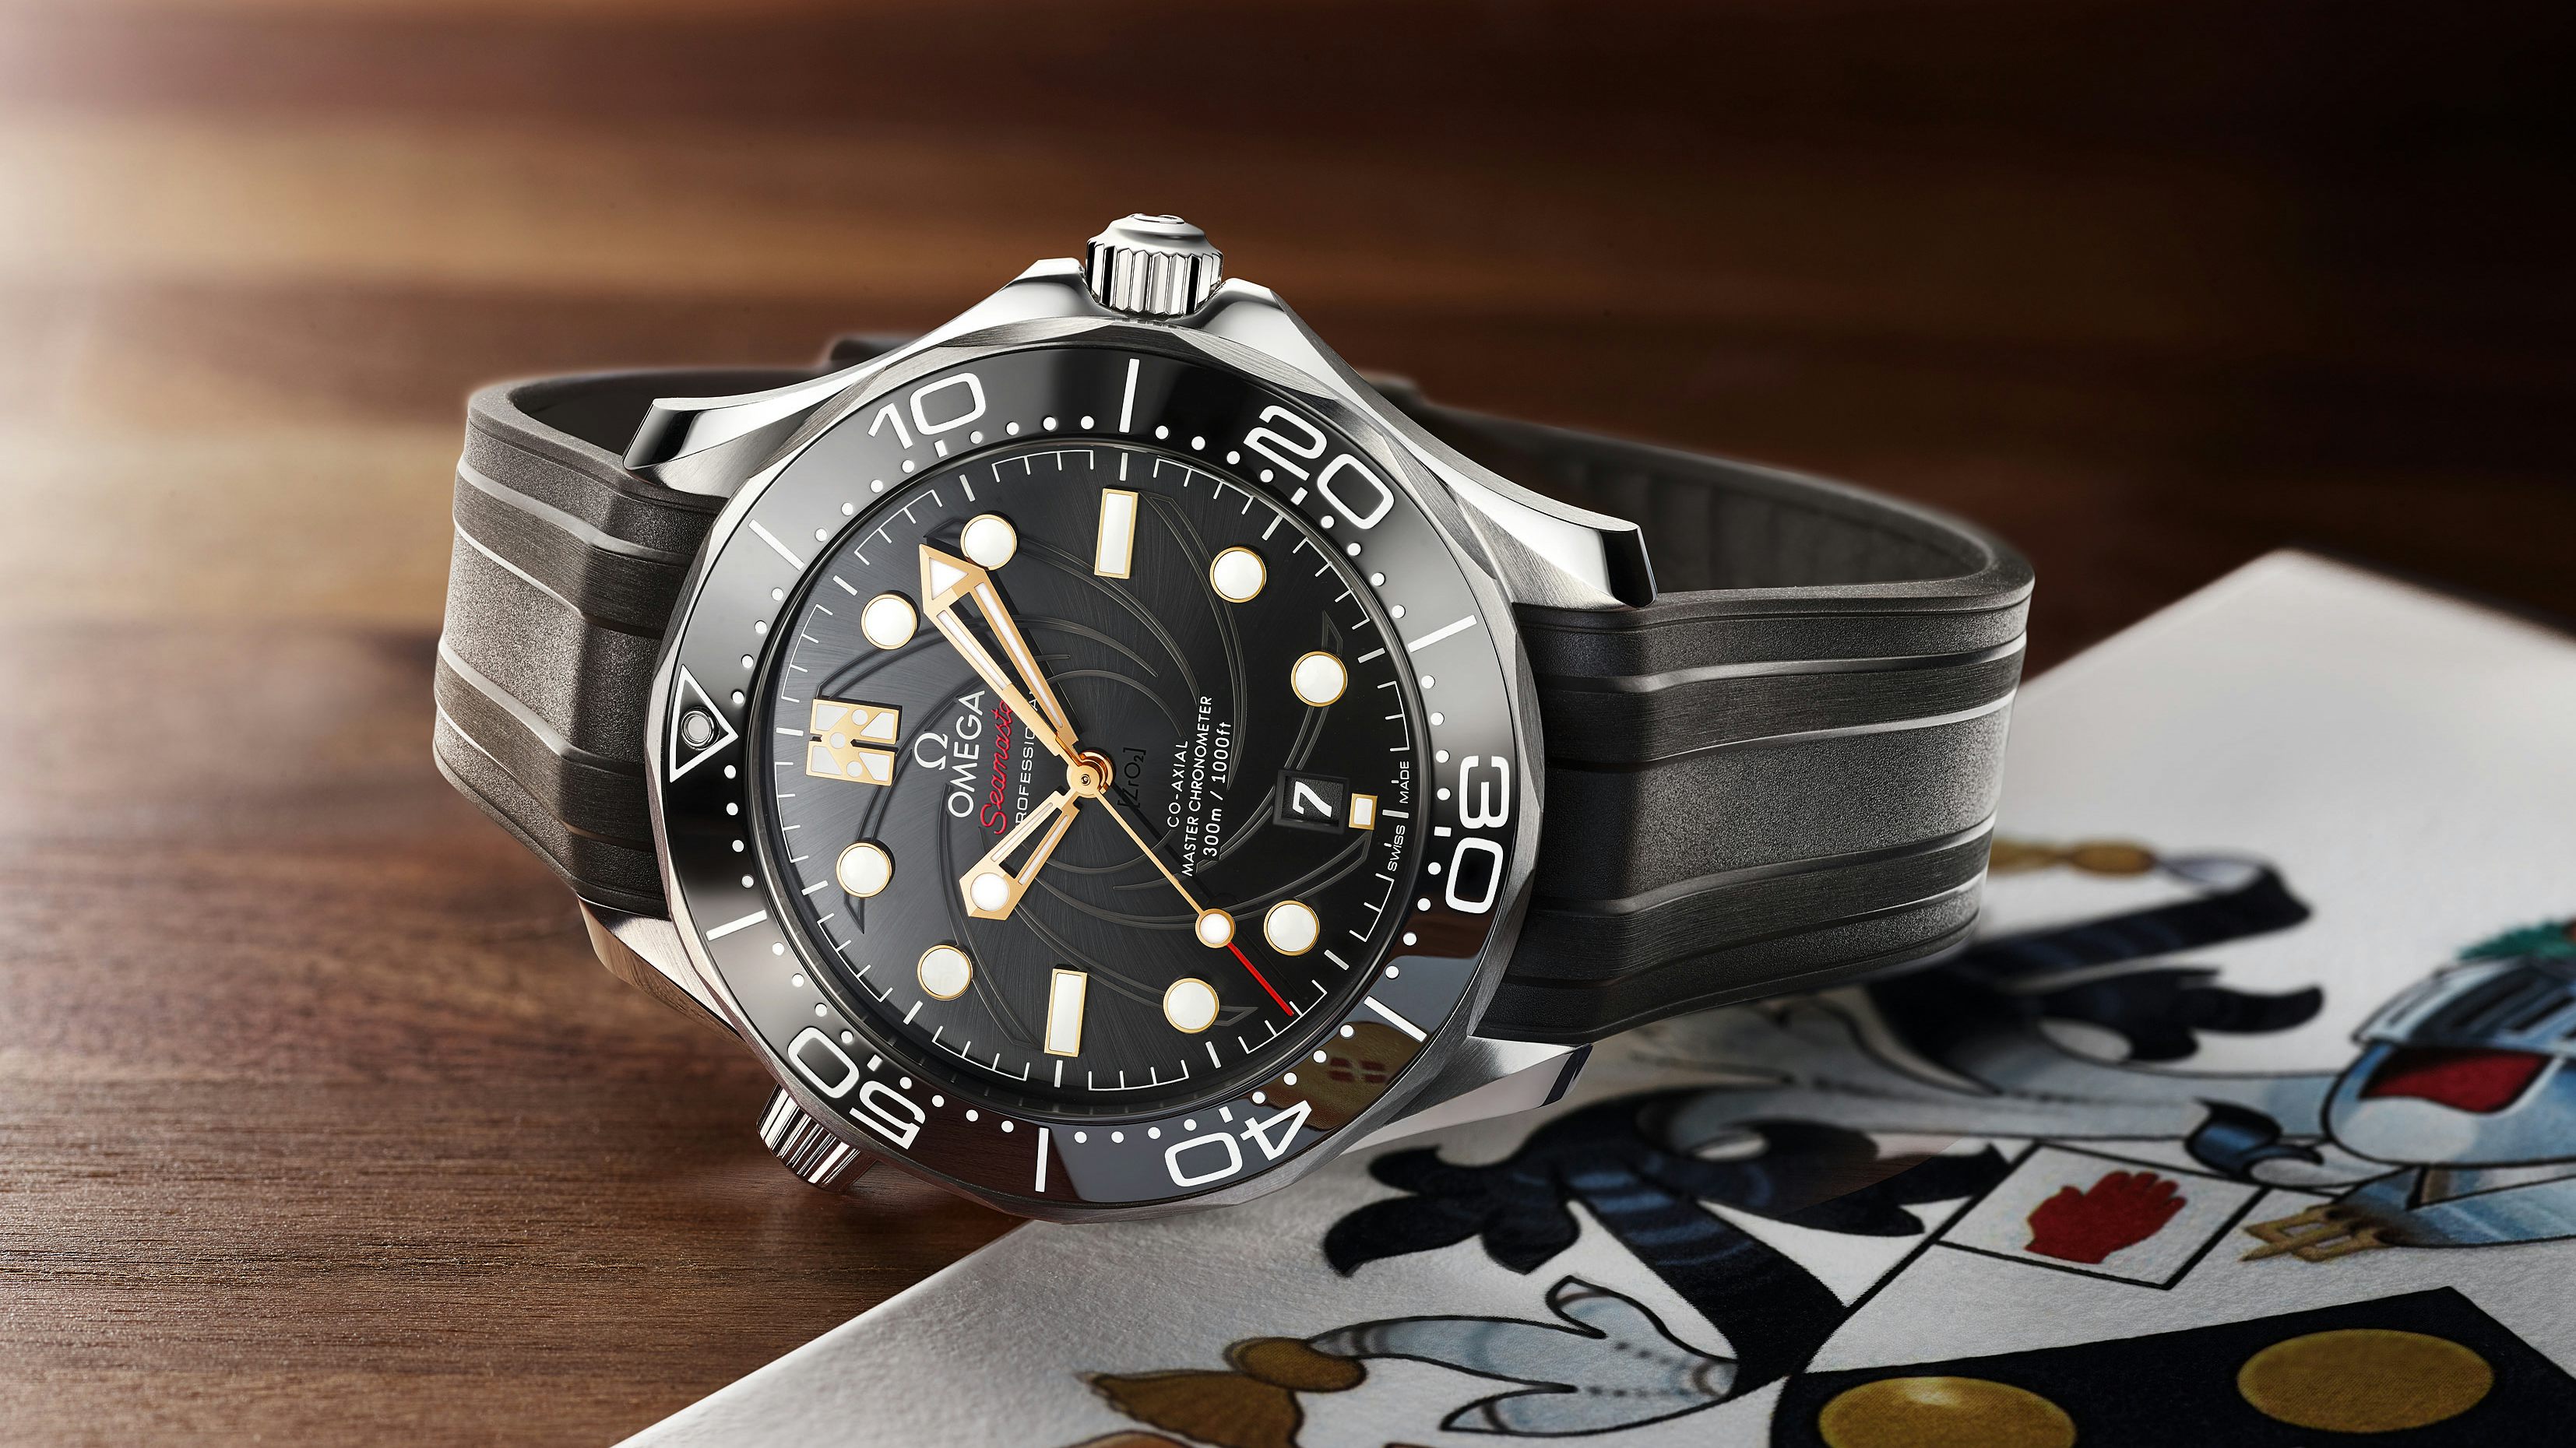 Introducing: The Omega Seamaster Diver 300M For The 50th